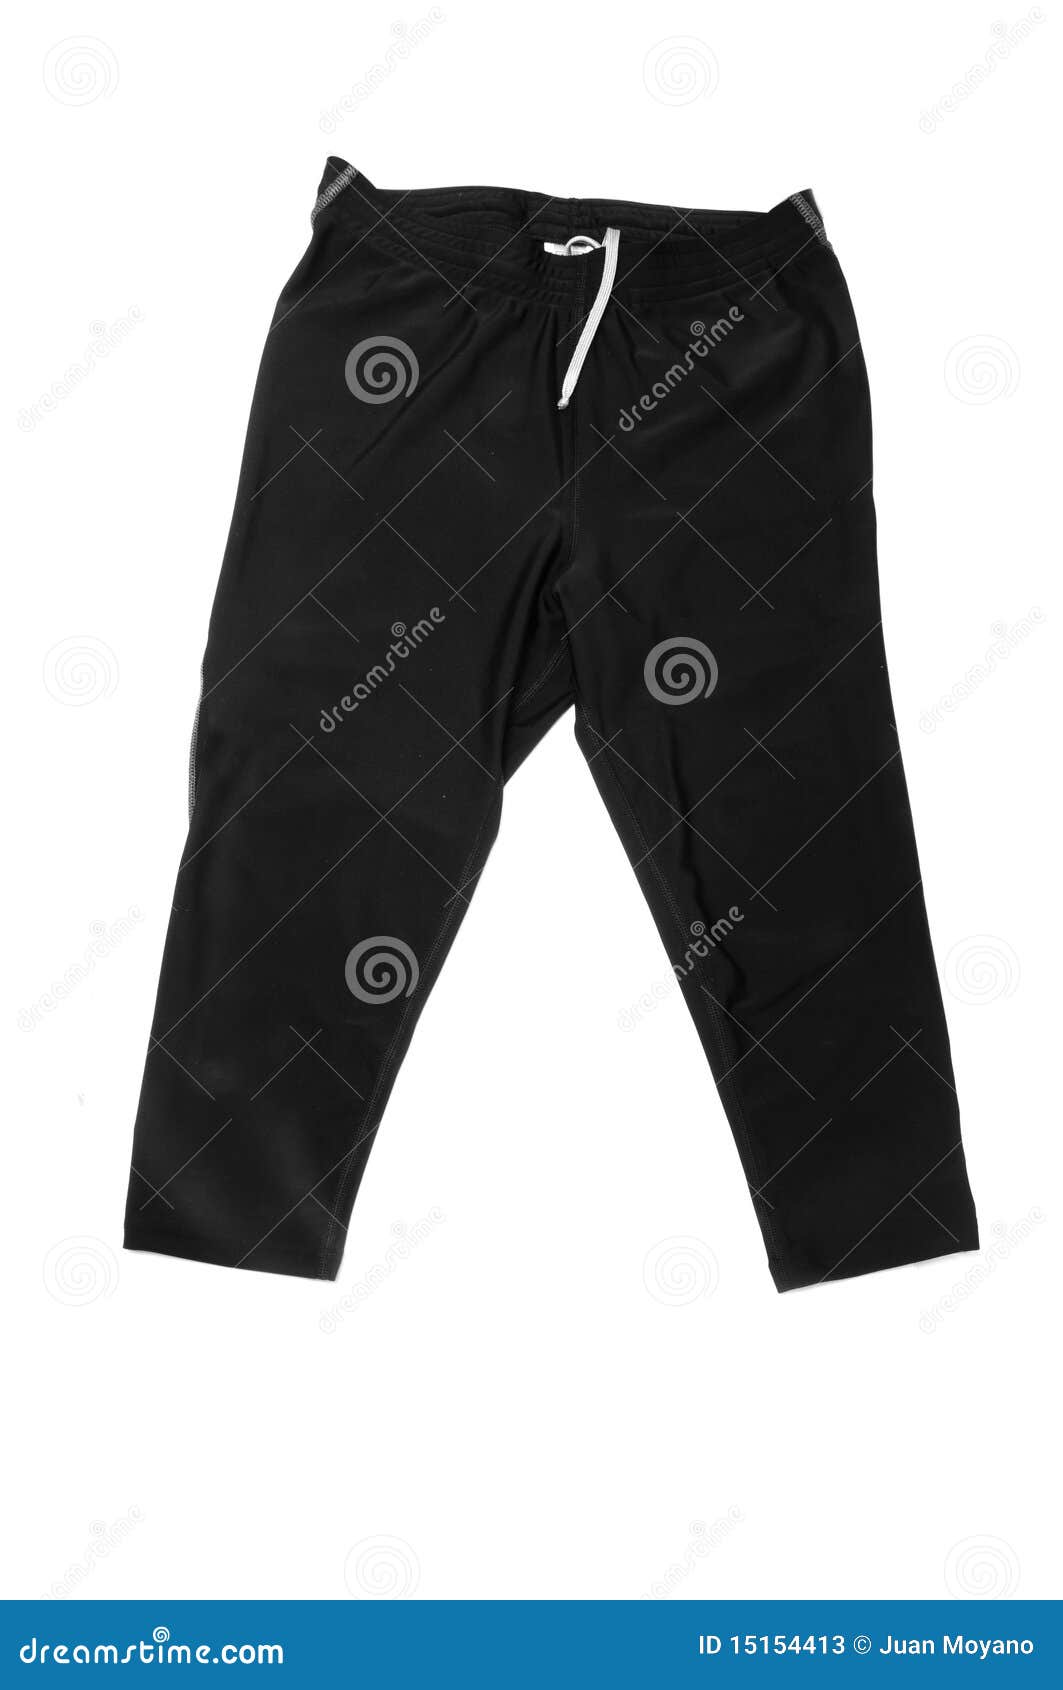 Compression shorts stock image. Image of compression - 15154413